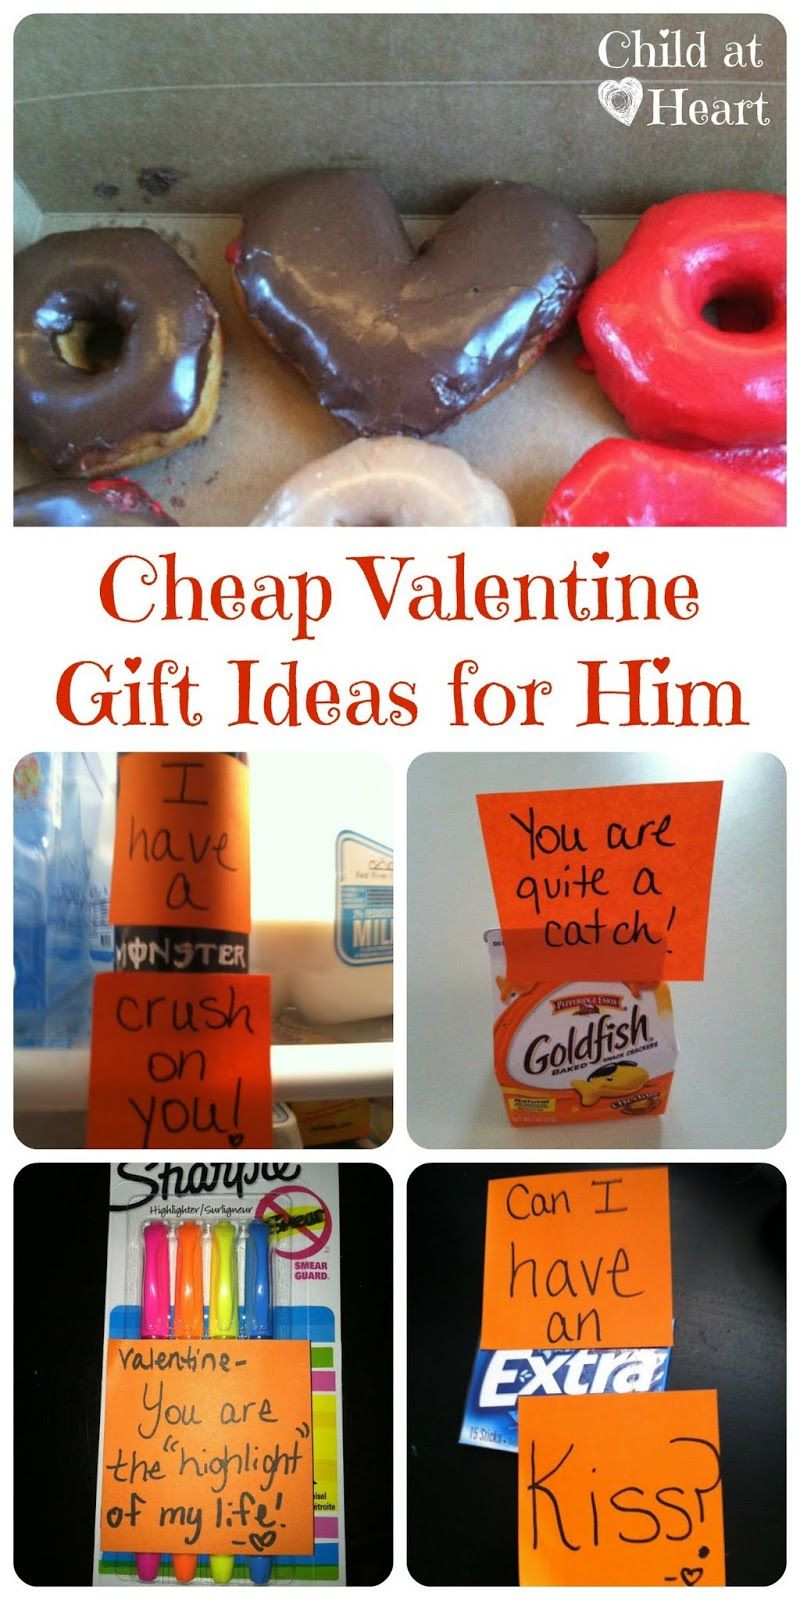 Funny Valentine Gift Ideas
 Cheap Valentine Gift Ideas for Him Deonna Wade